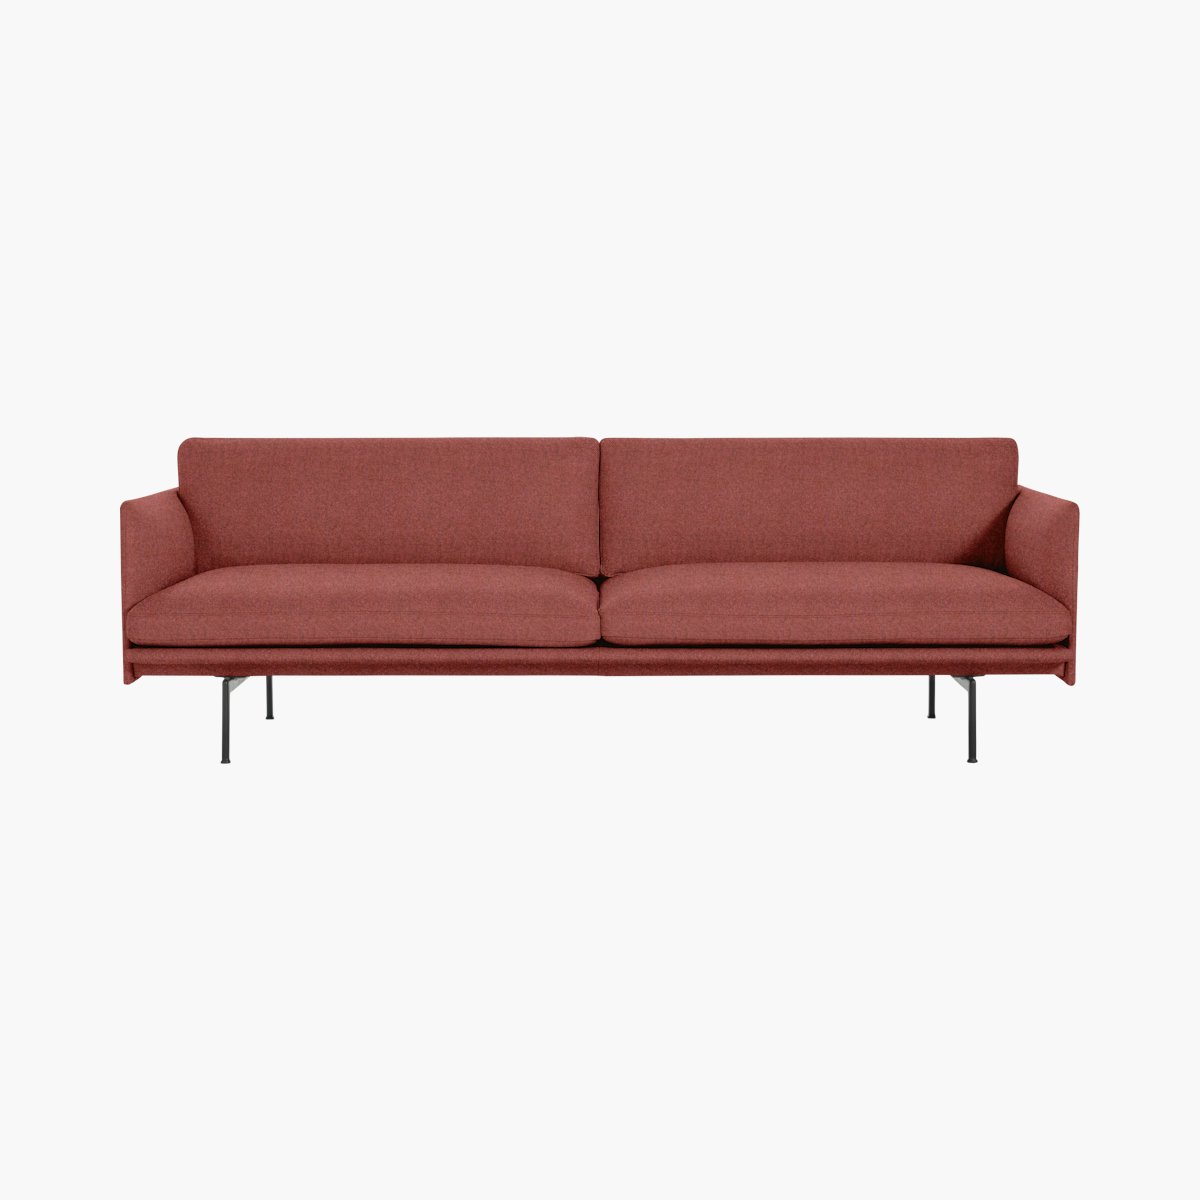 Outline Sofa, 3 Seater